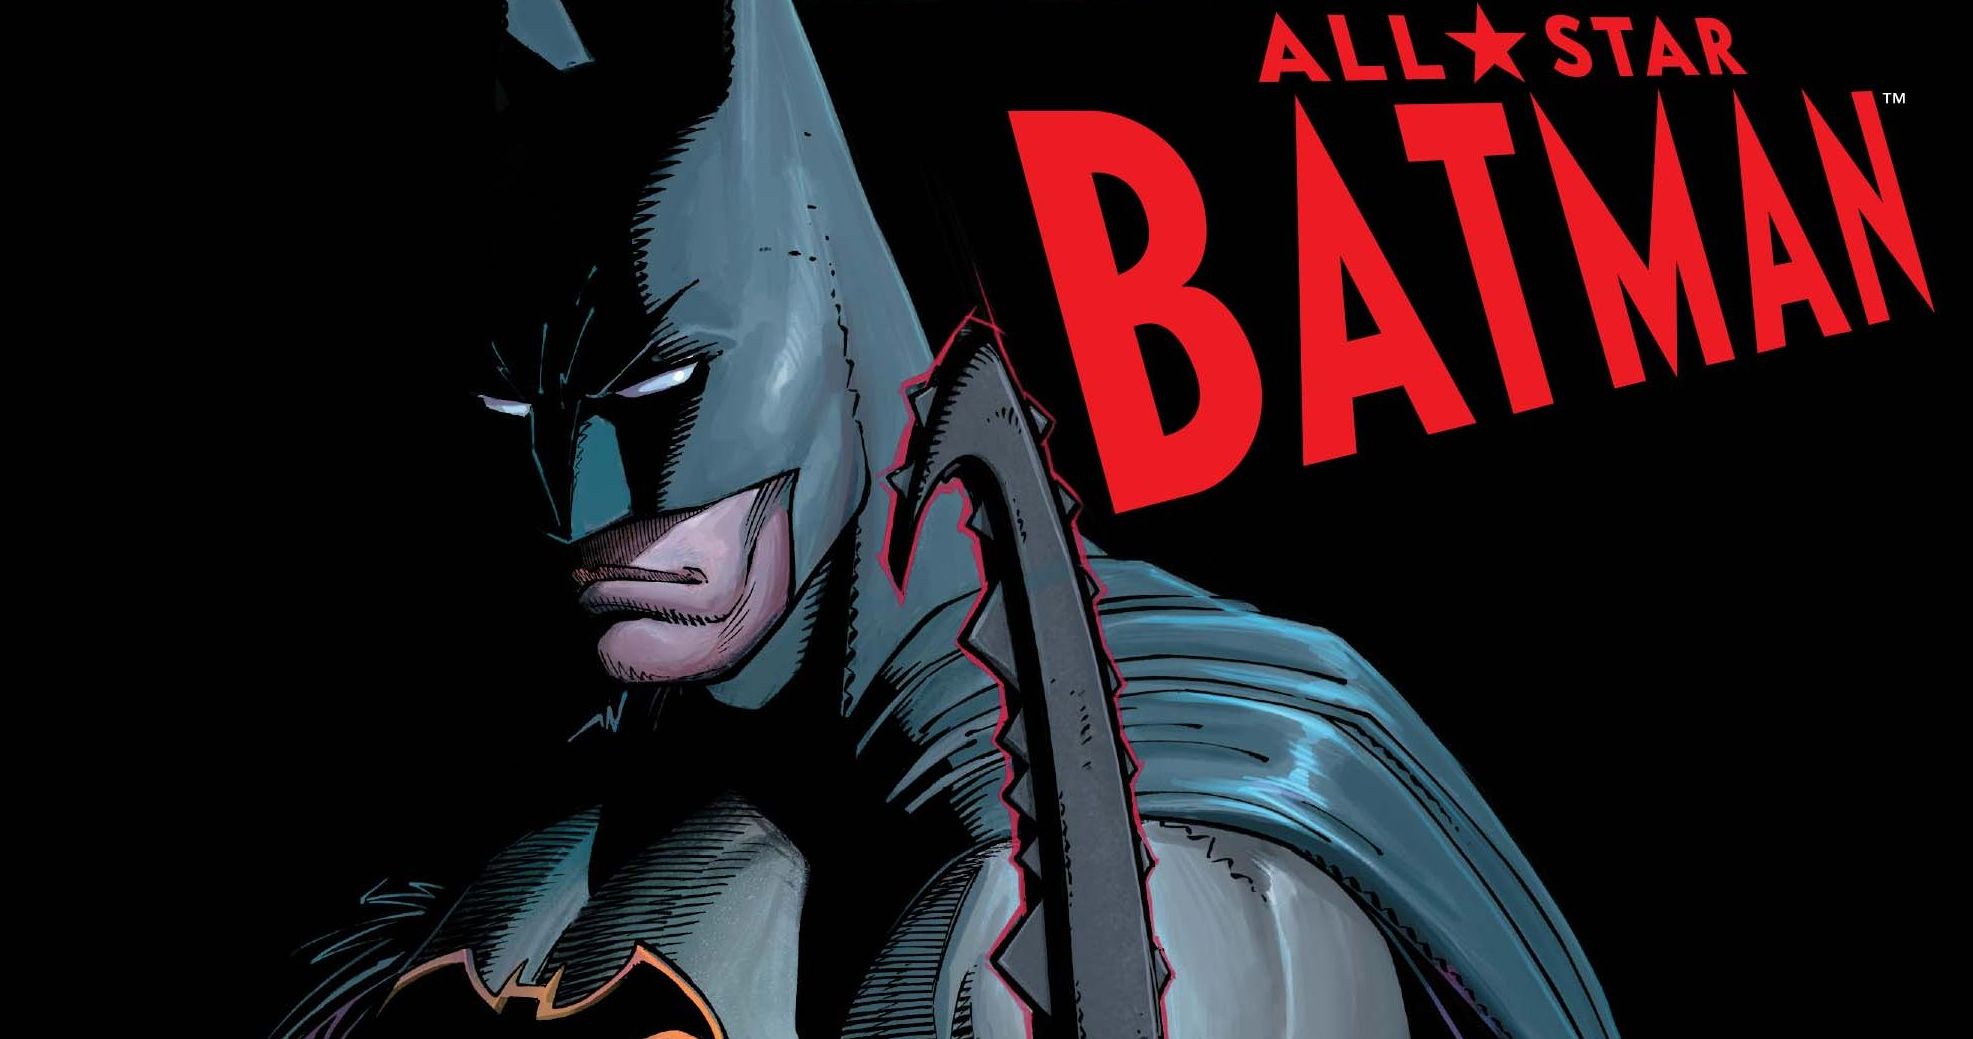 All Star Batman My Own Worst Enemy Review by Deffinition as Part of Graphic Novel Talk